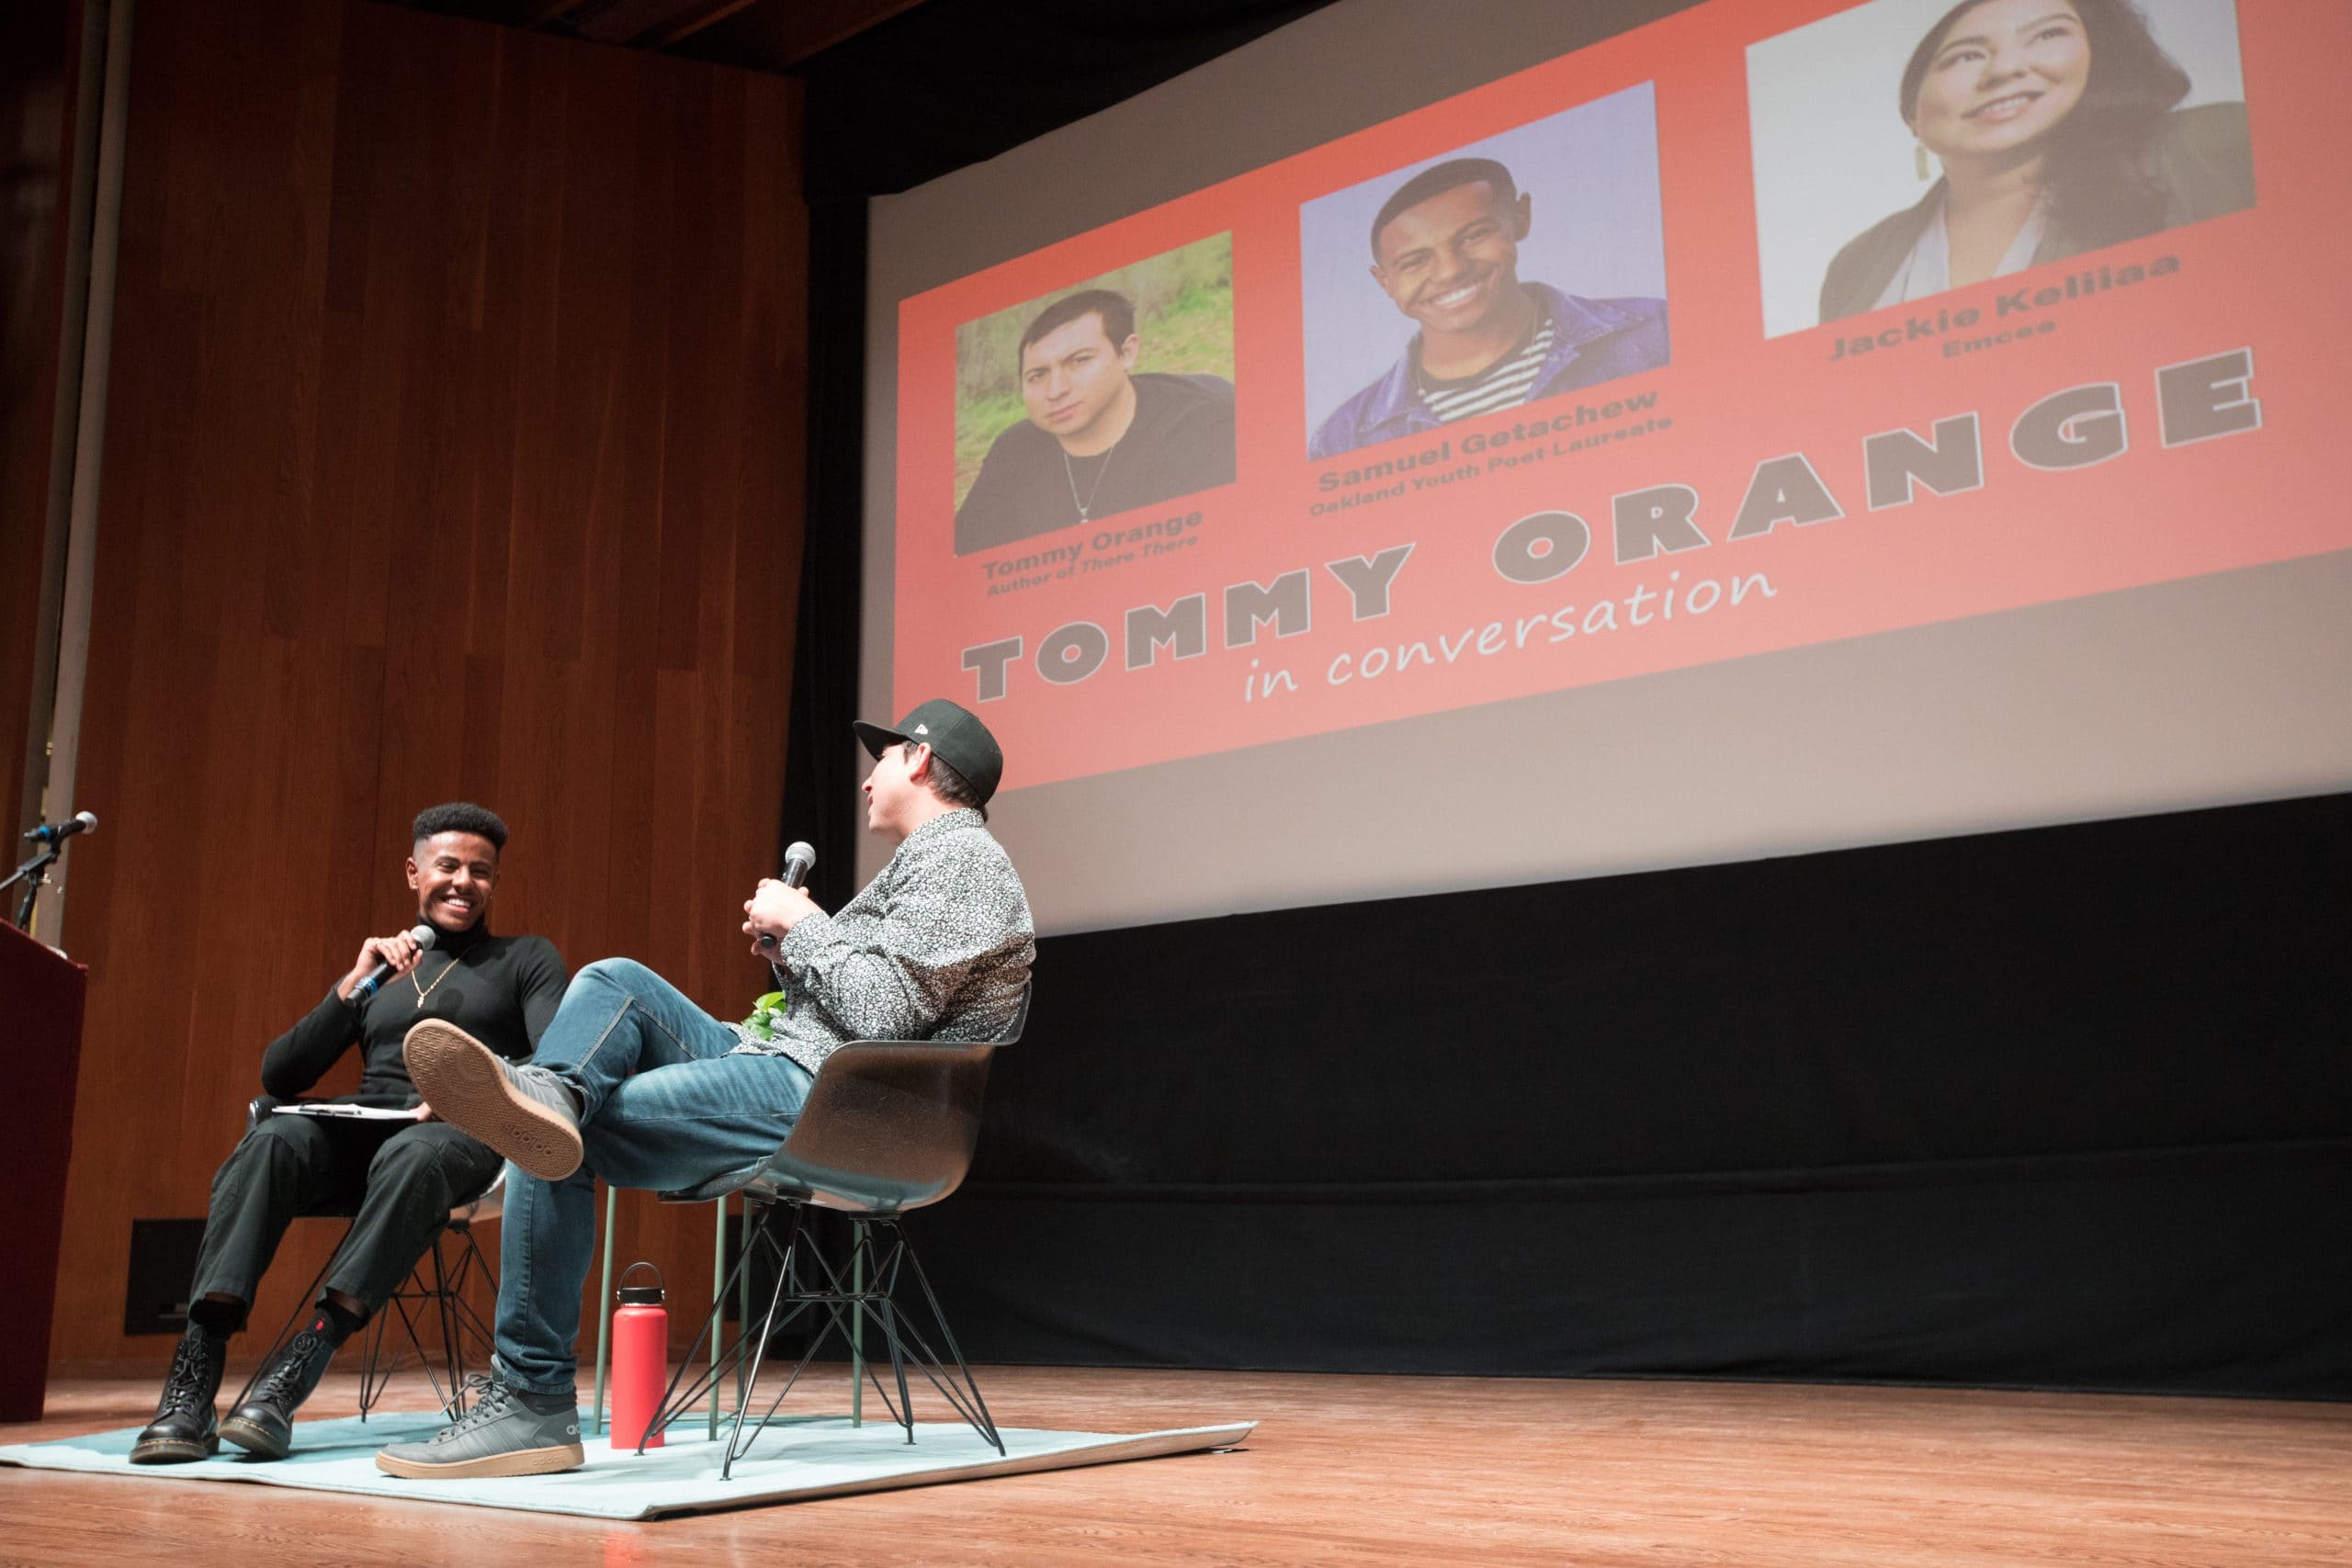 Tommy Orange in Conversation with 2019 Oakland Youth Poet Laureate Samuel Getachew at the Oakland Museum of California on November 1, 2019.